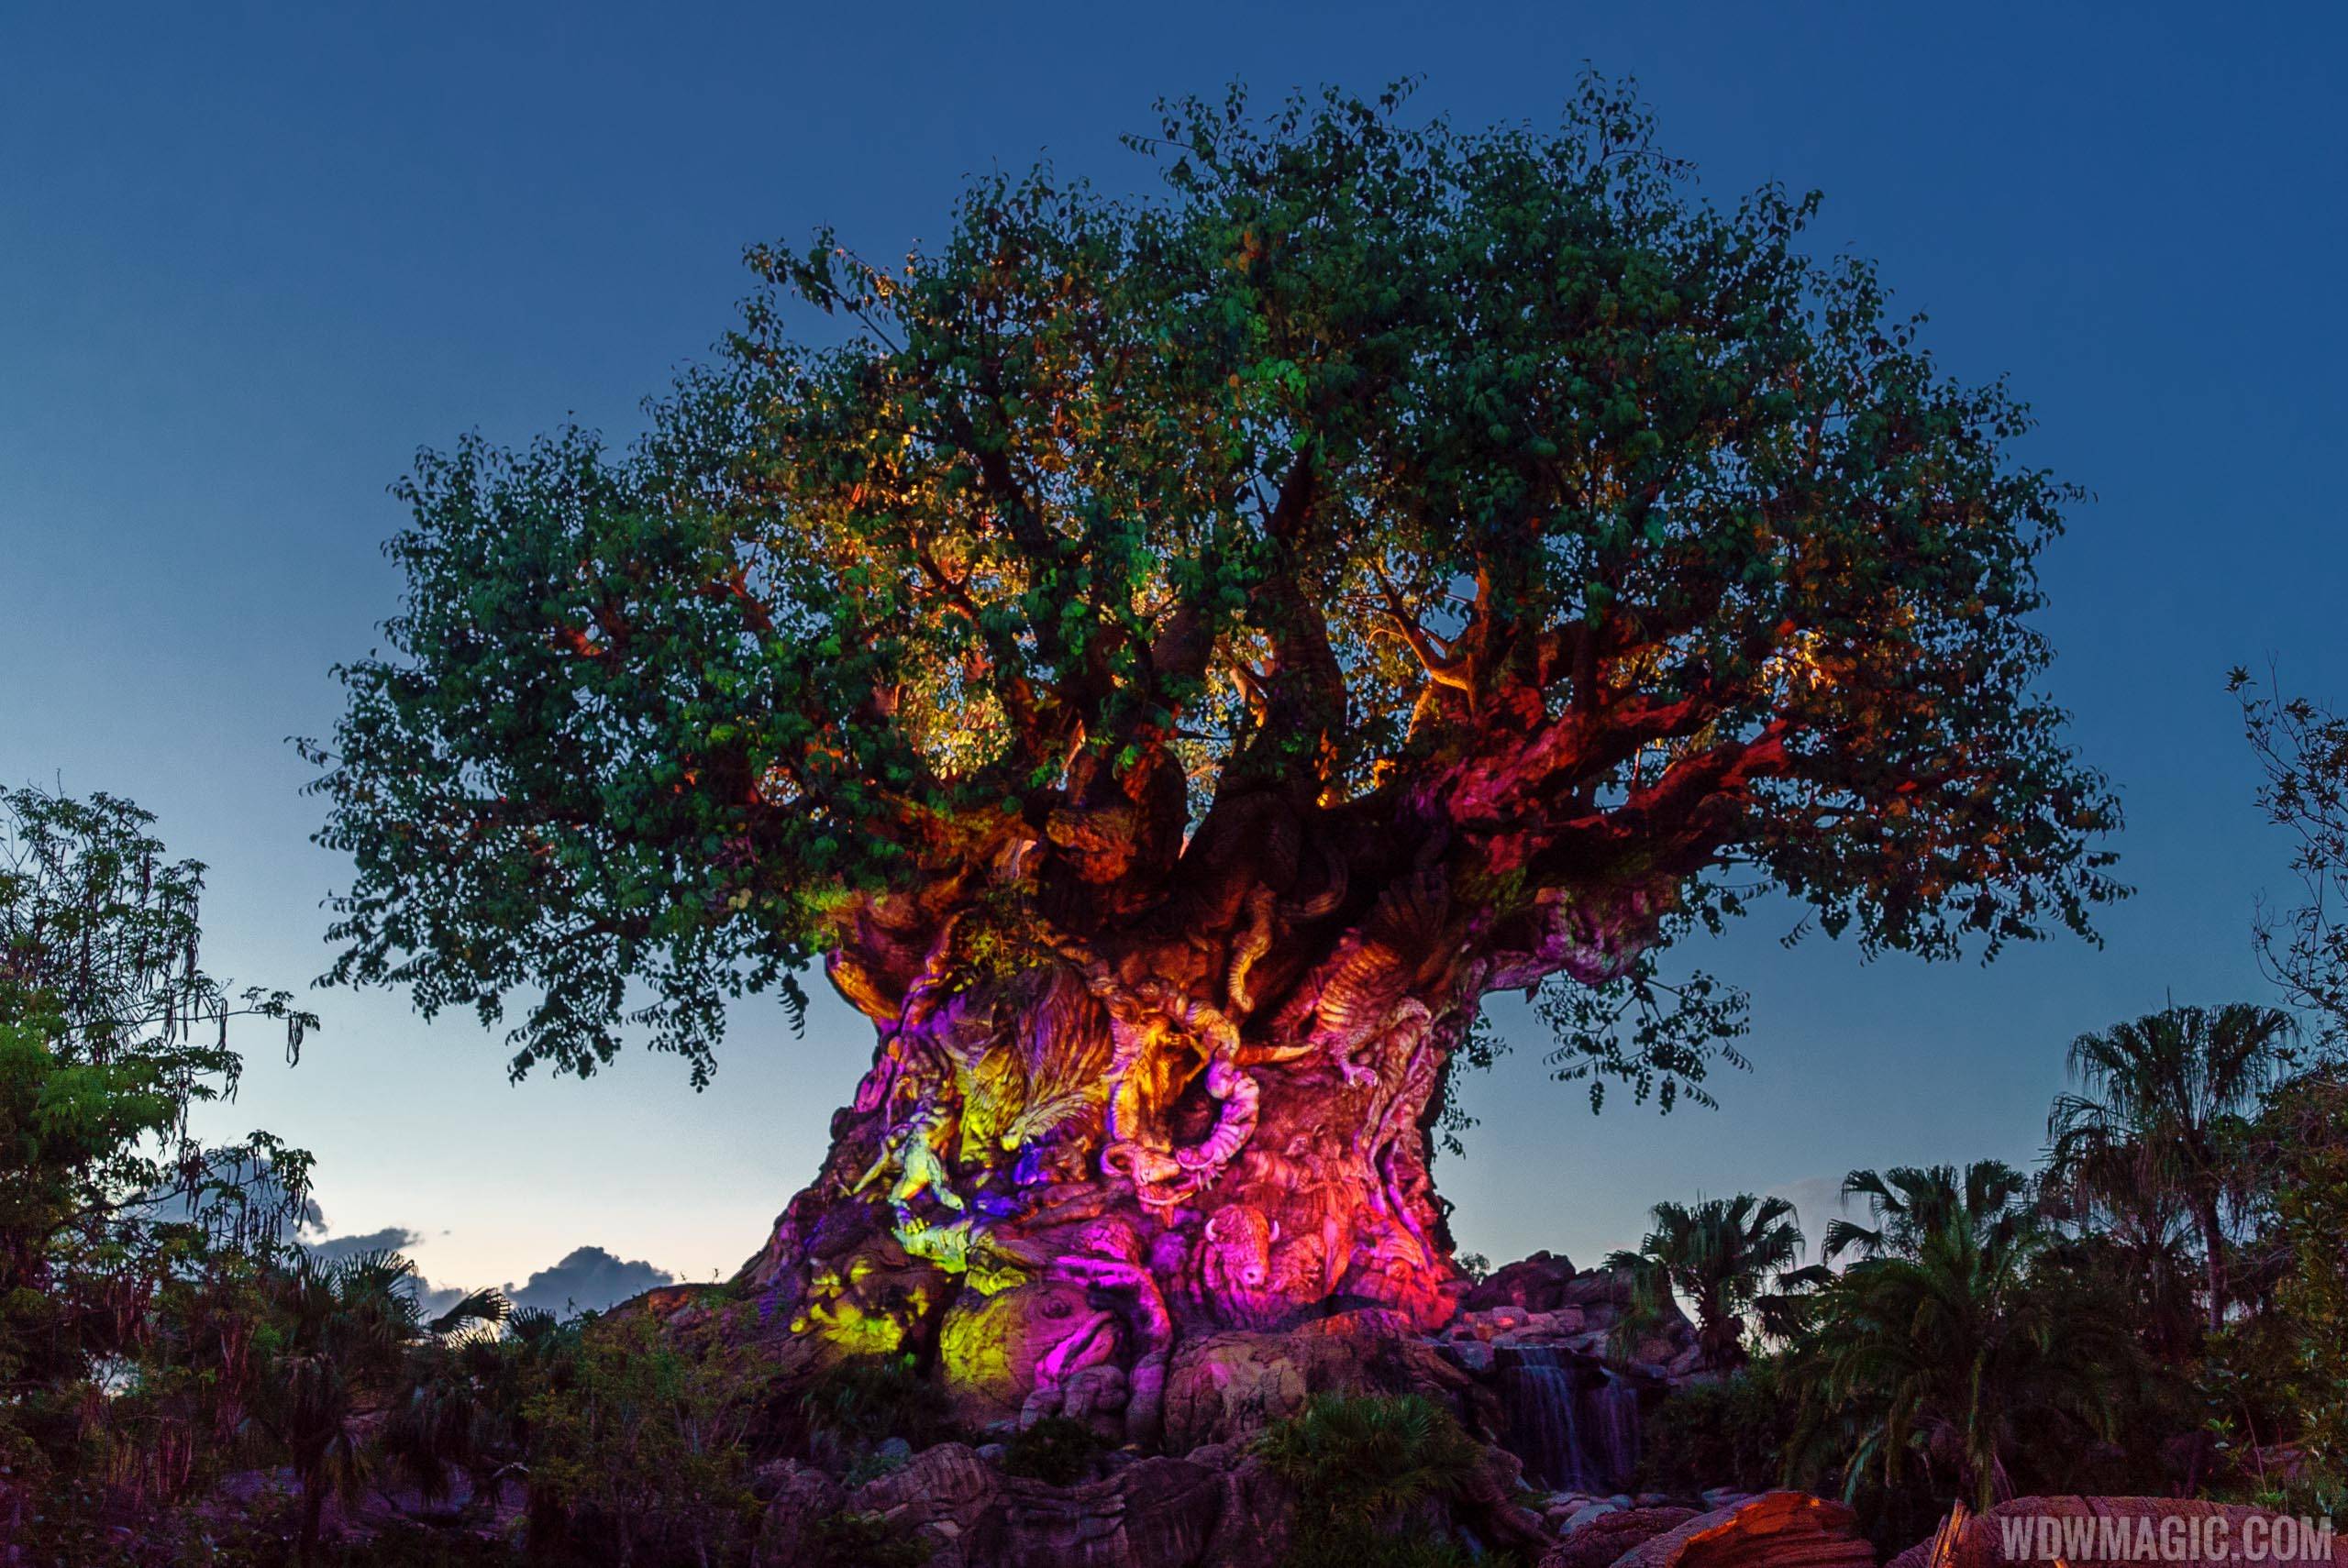 Disney confirms attraction line-up for Disney's Animal Kingdom Extended Evening Hours along with dates into December